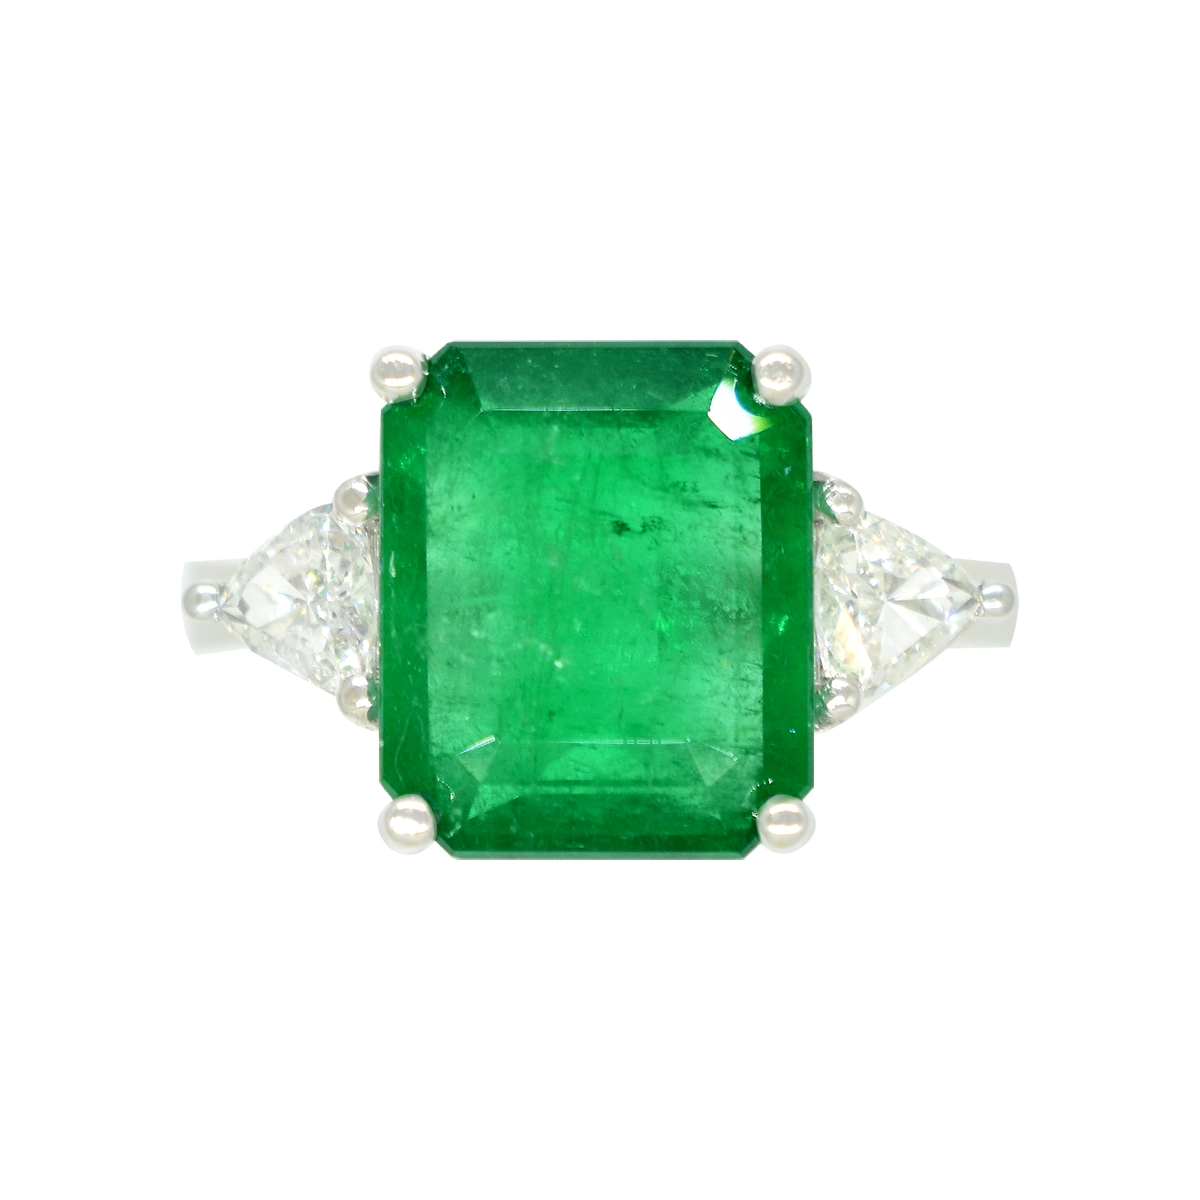 Big emerald cut natural emerald and trillion cut diamond ring in solid 18K white gold 3-stones ring style